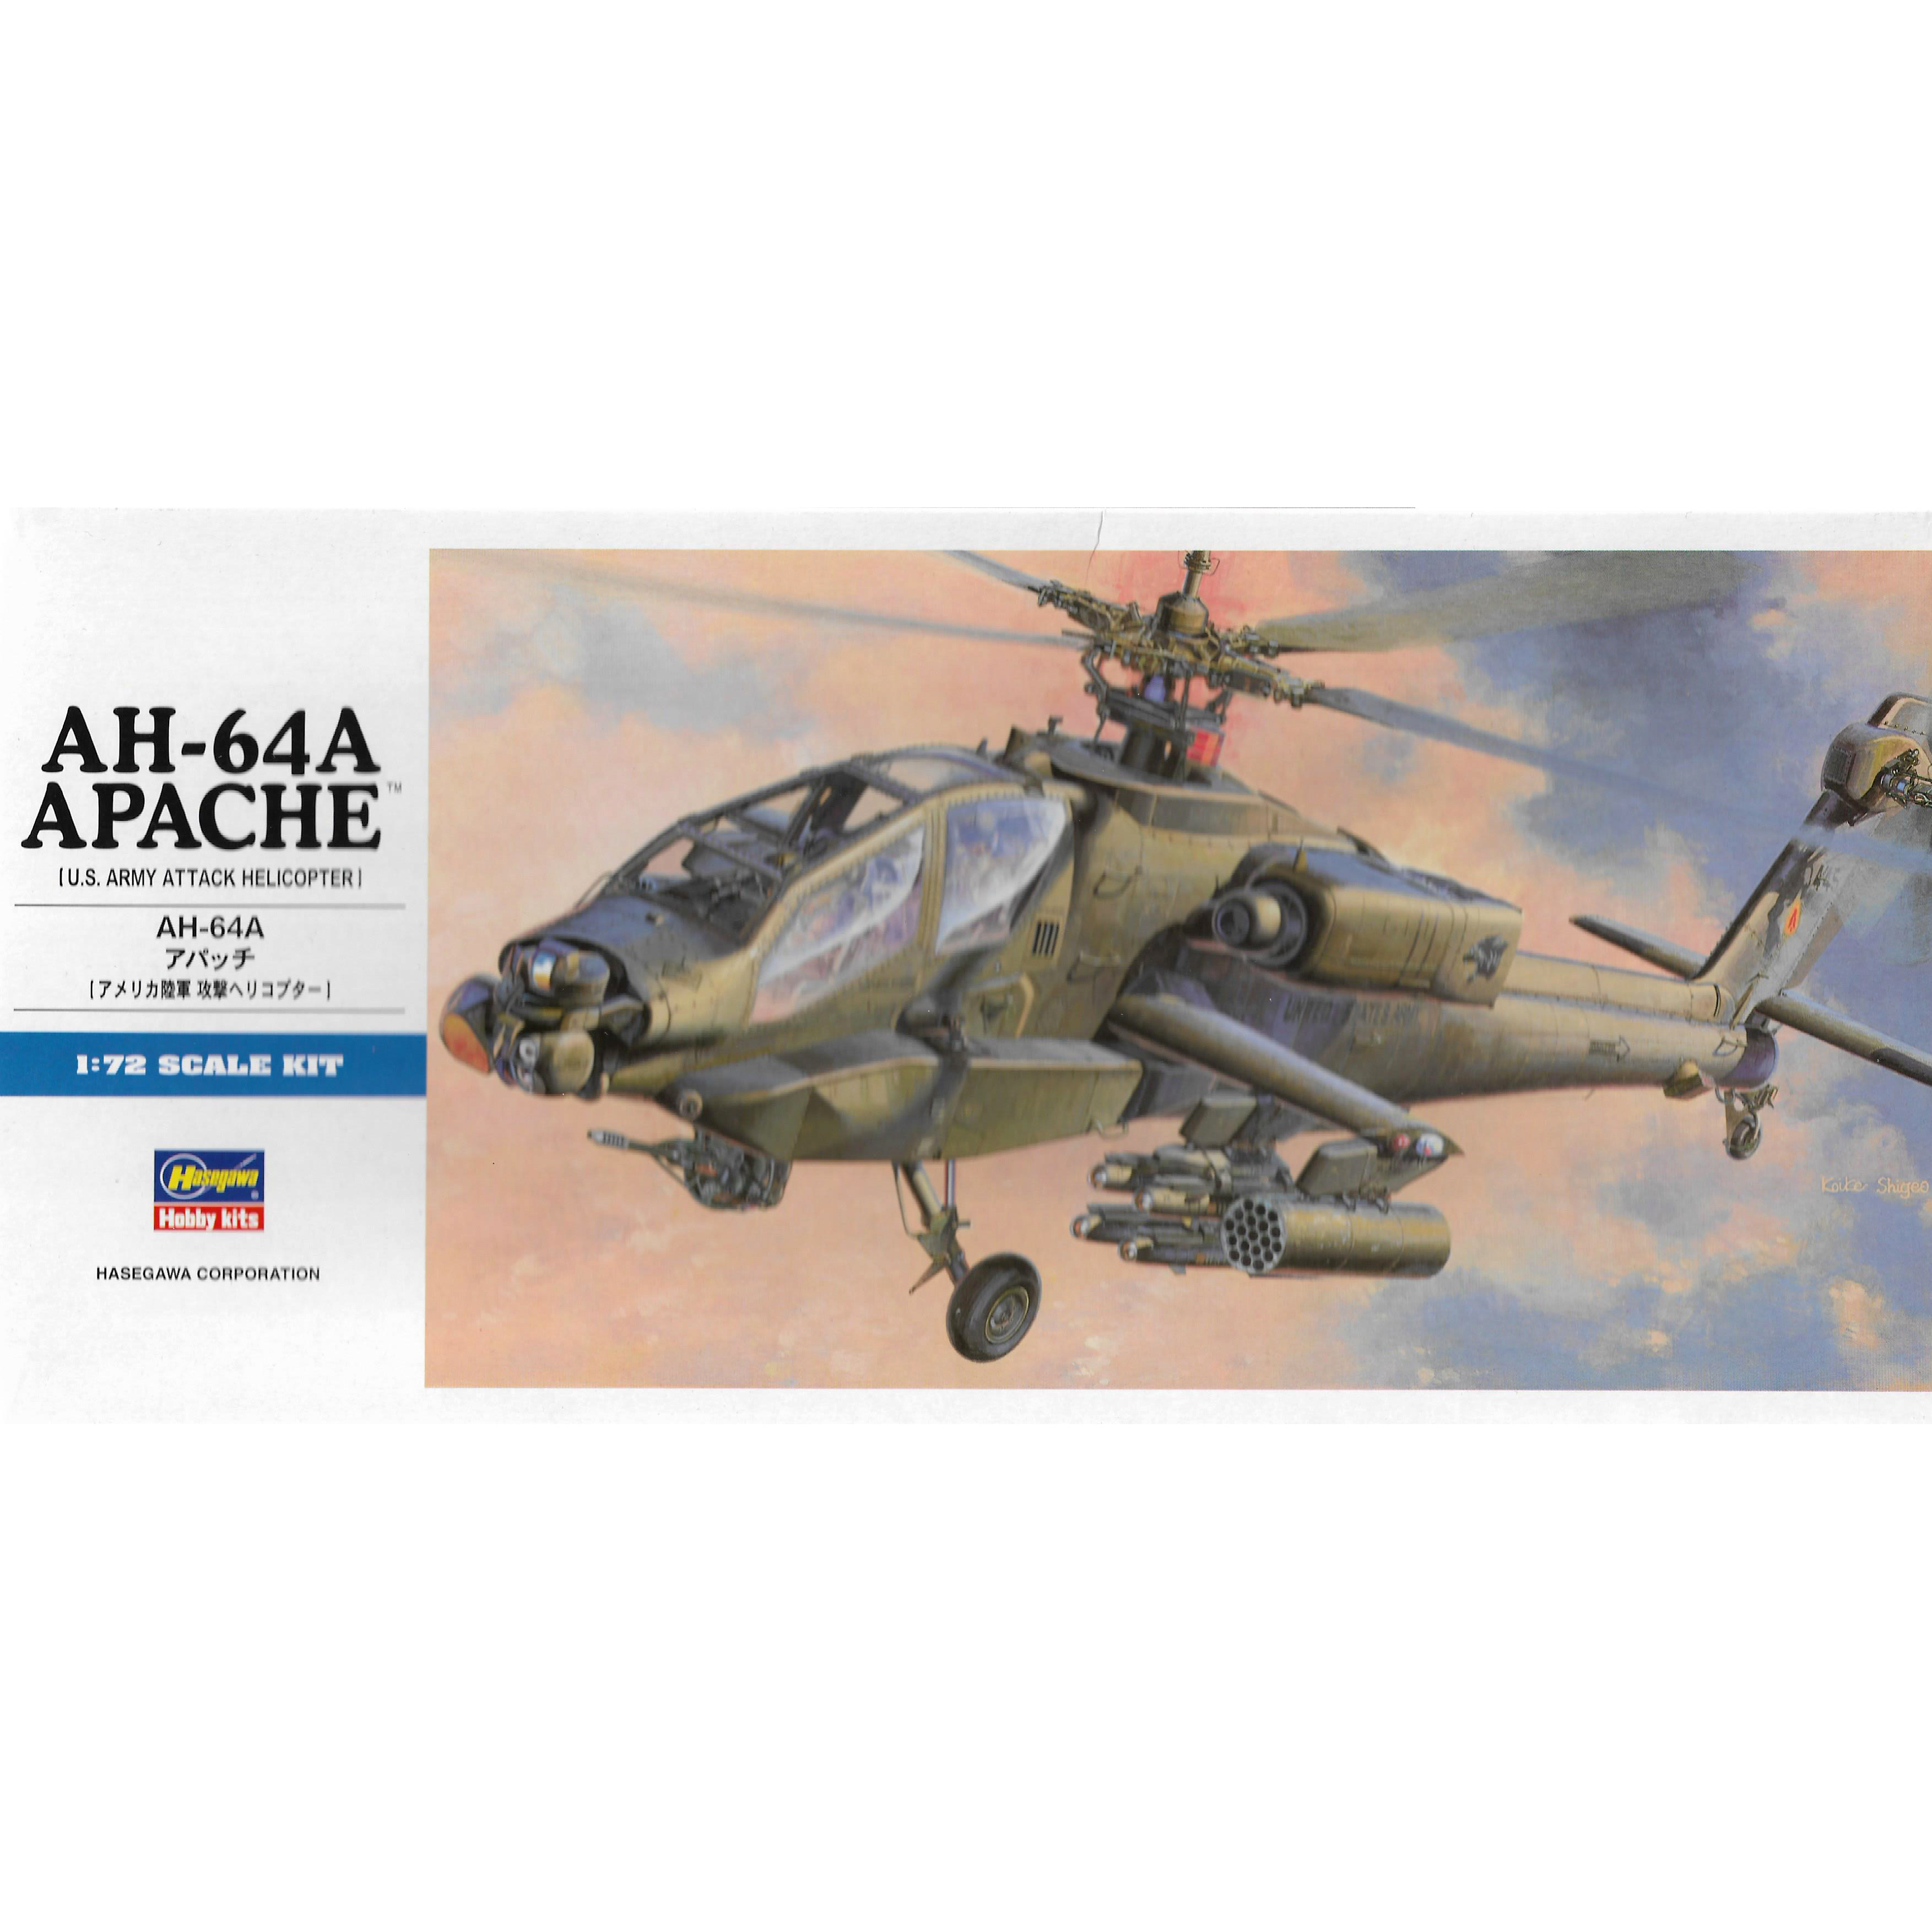 00436 Hasegawa 1/72 Ah-64A Apache Helicopter